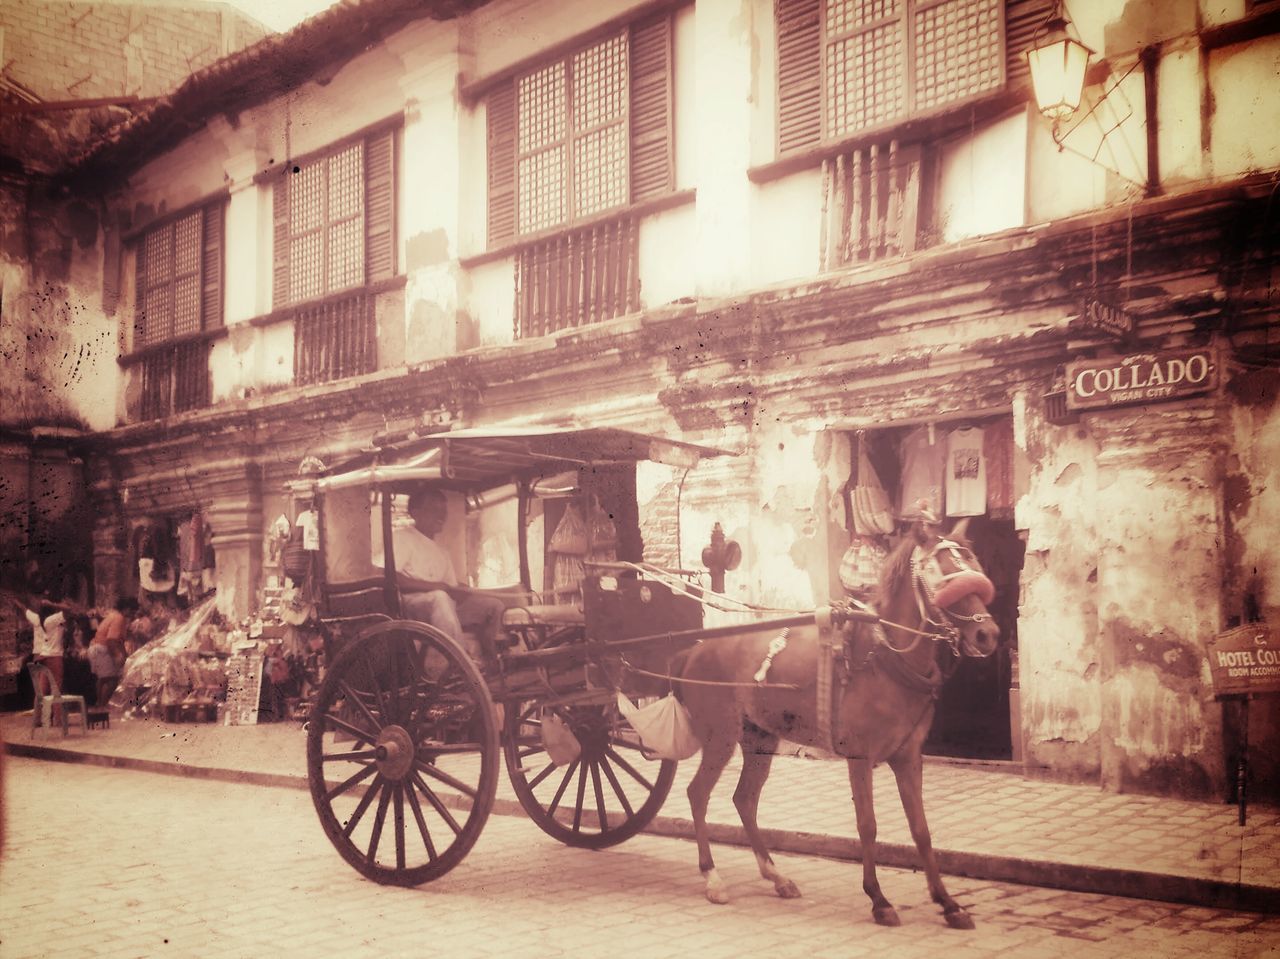 TWO HORSES ON STREET